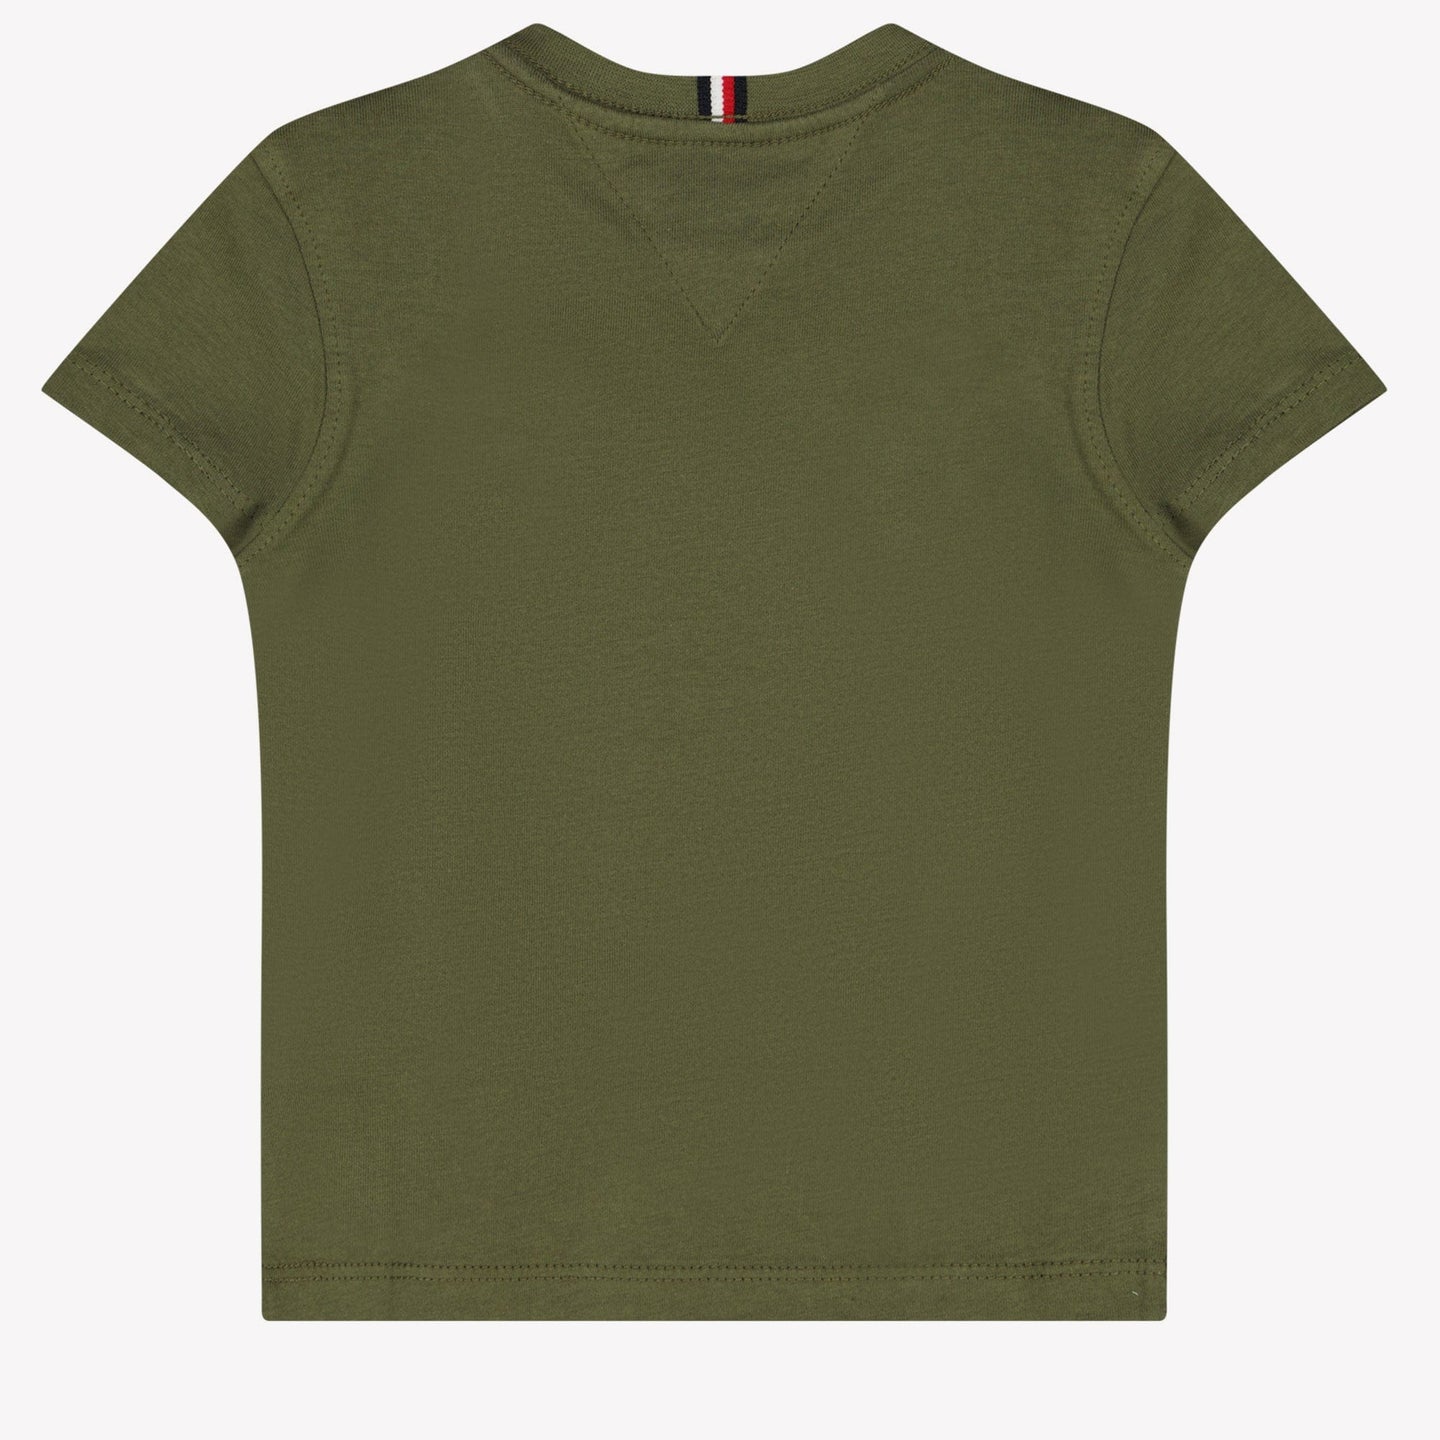 Tommy Hilfiger Baby Jongens T-shirt Army 74